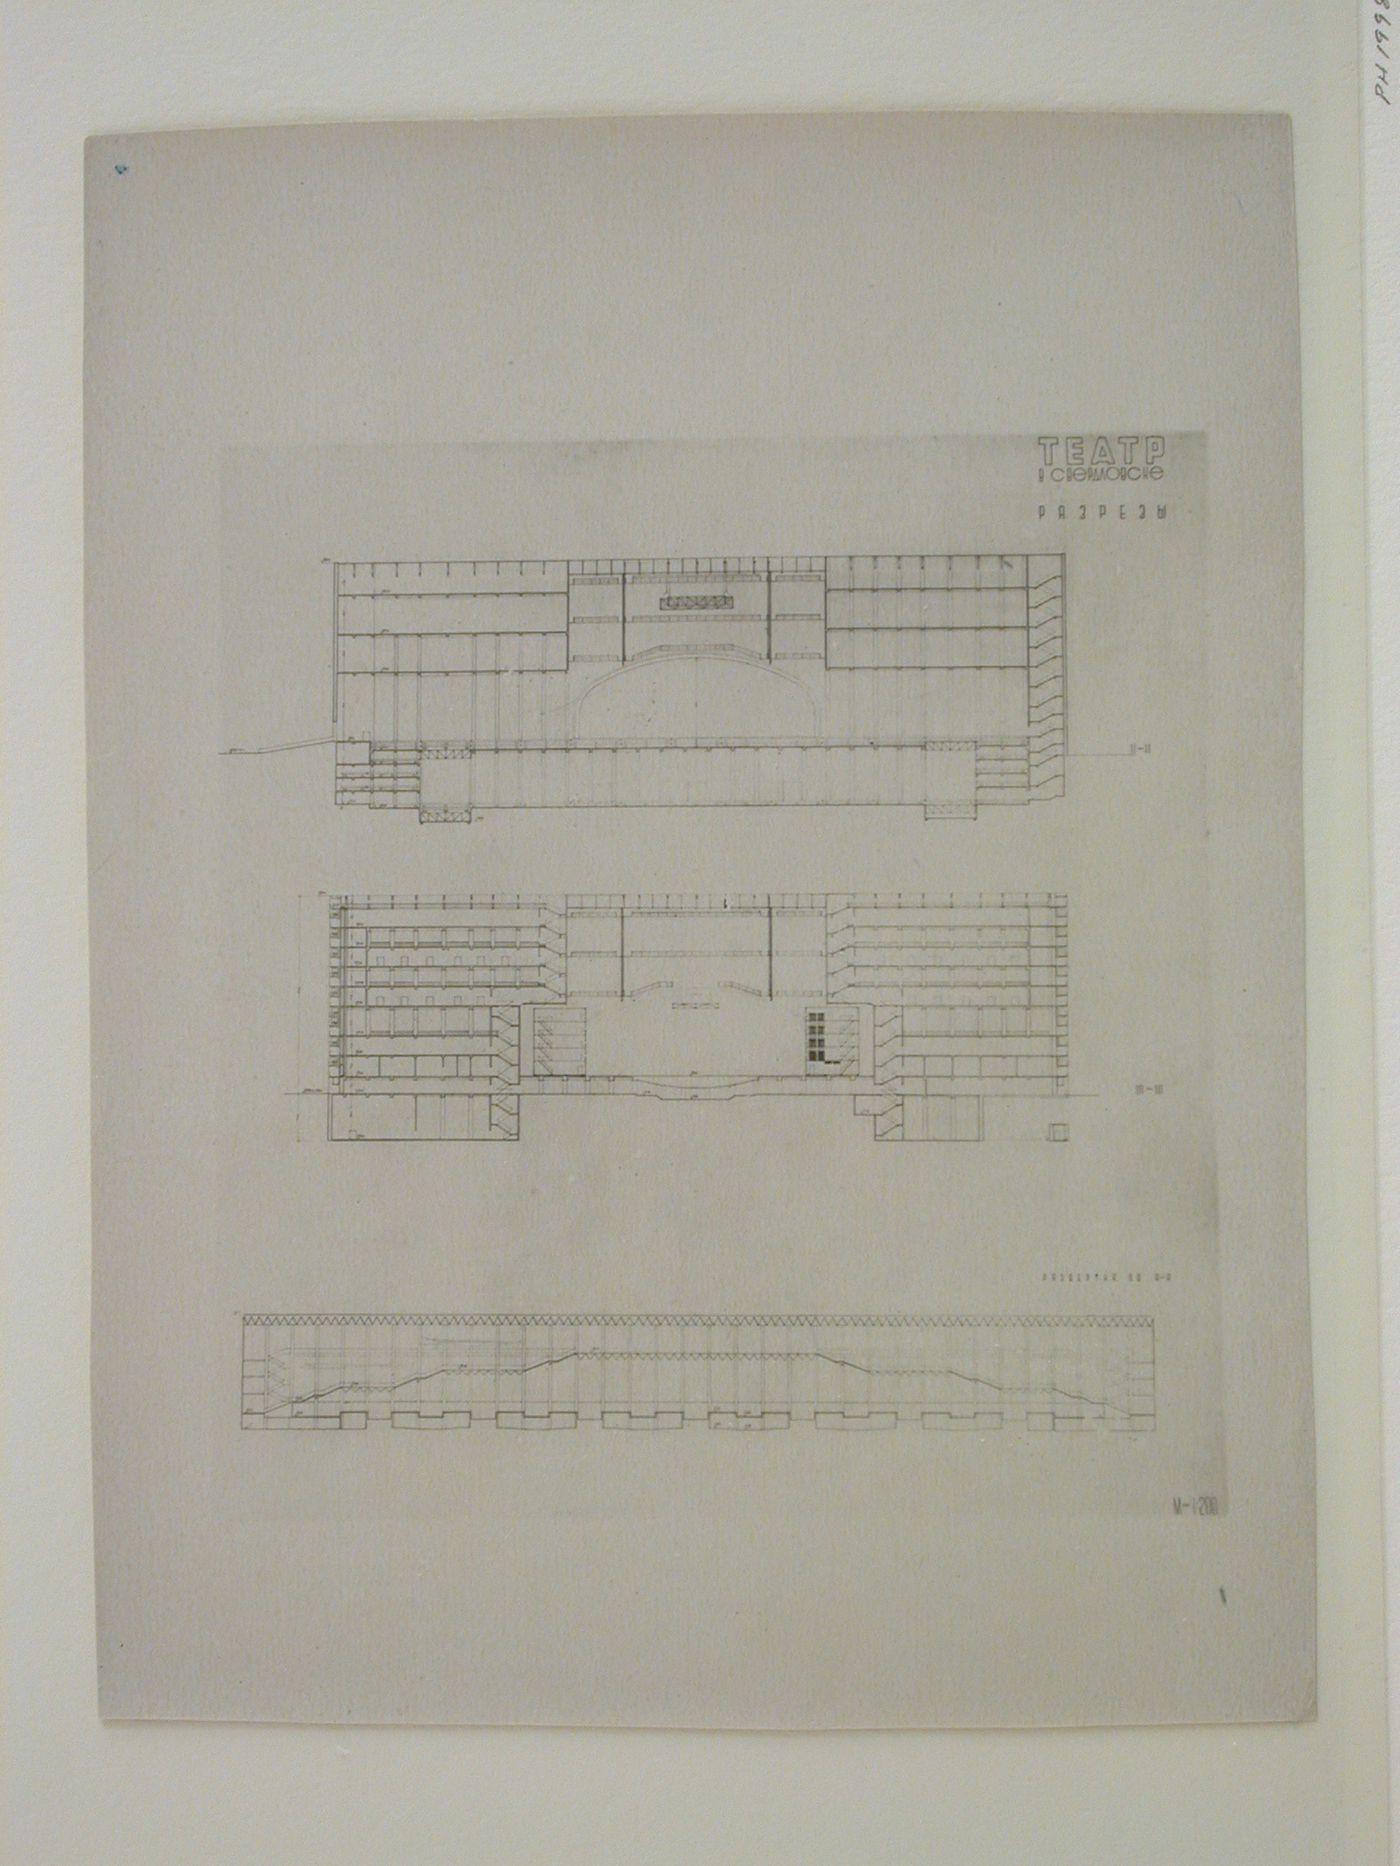 Photograph of sections for the final round of competition for a "synthetic theater" in Sverdlovsk, Soviet Union (now  Ekaterinburg, Russia)